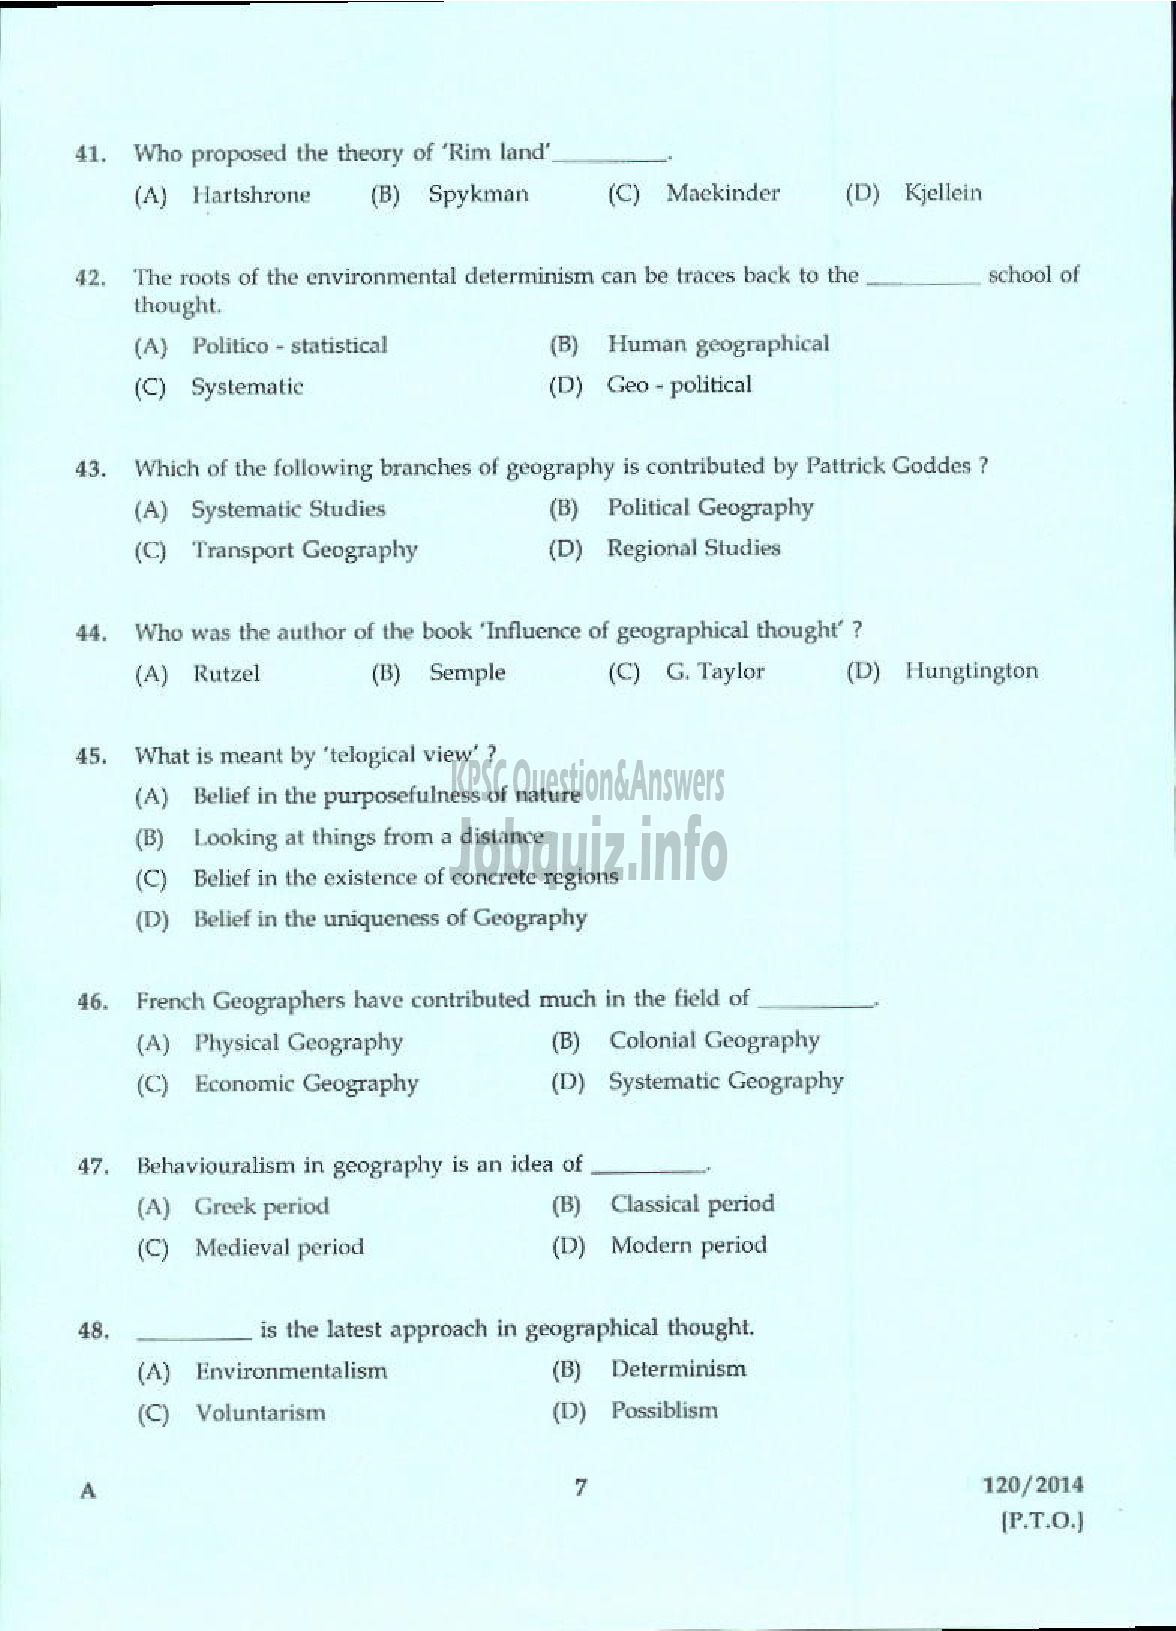 Kerala PSC Question Paper - LECTURER IN GEOGRAPHY KERALA COLLEGIATE EDUCATION-5